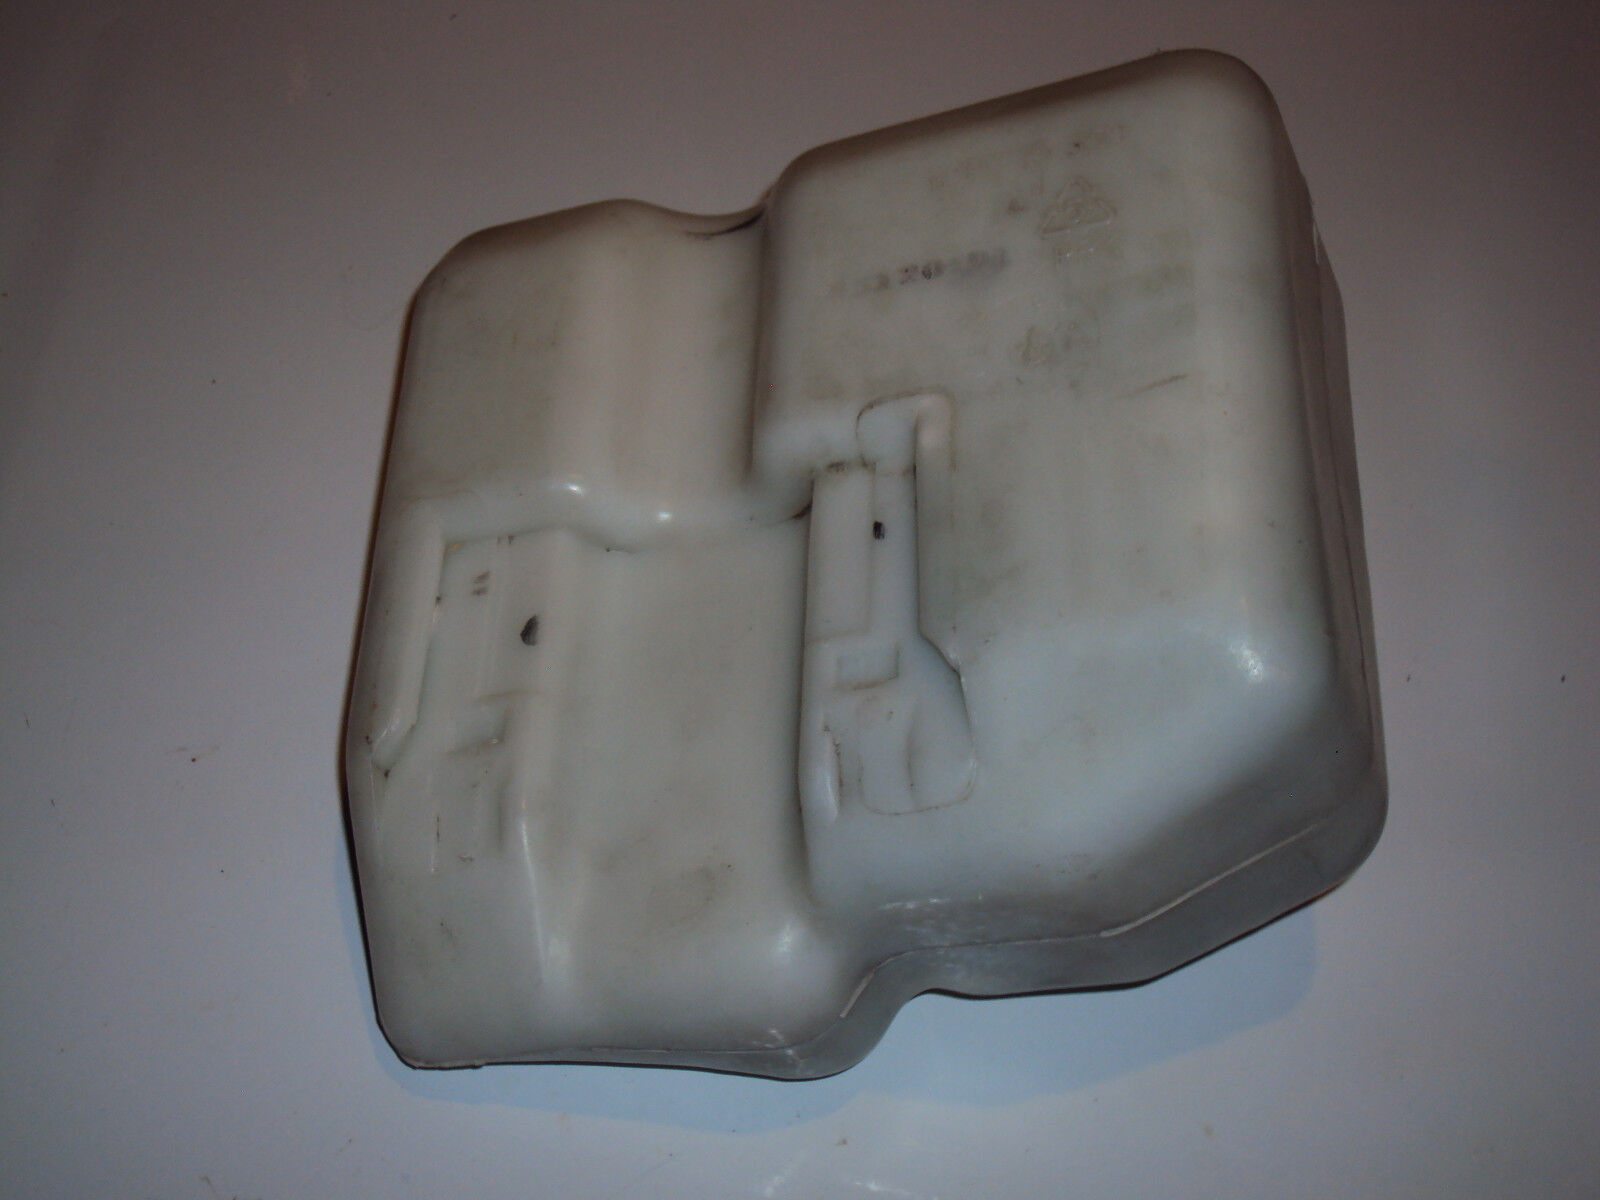 1994-97 Ford Aspire Coolant Overflow Reservoir in Great Condition.